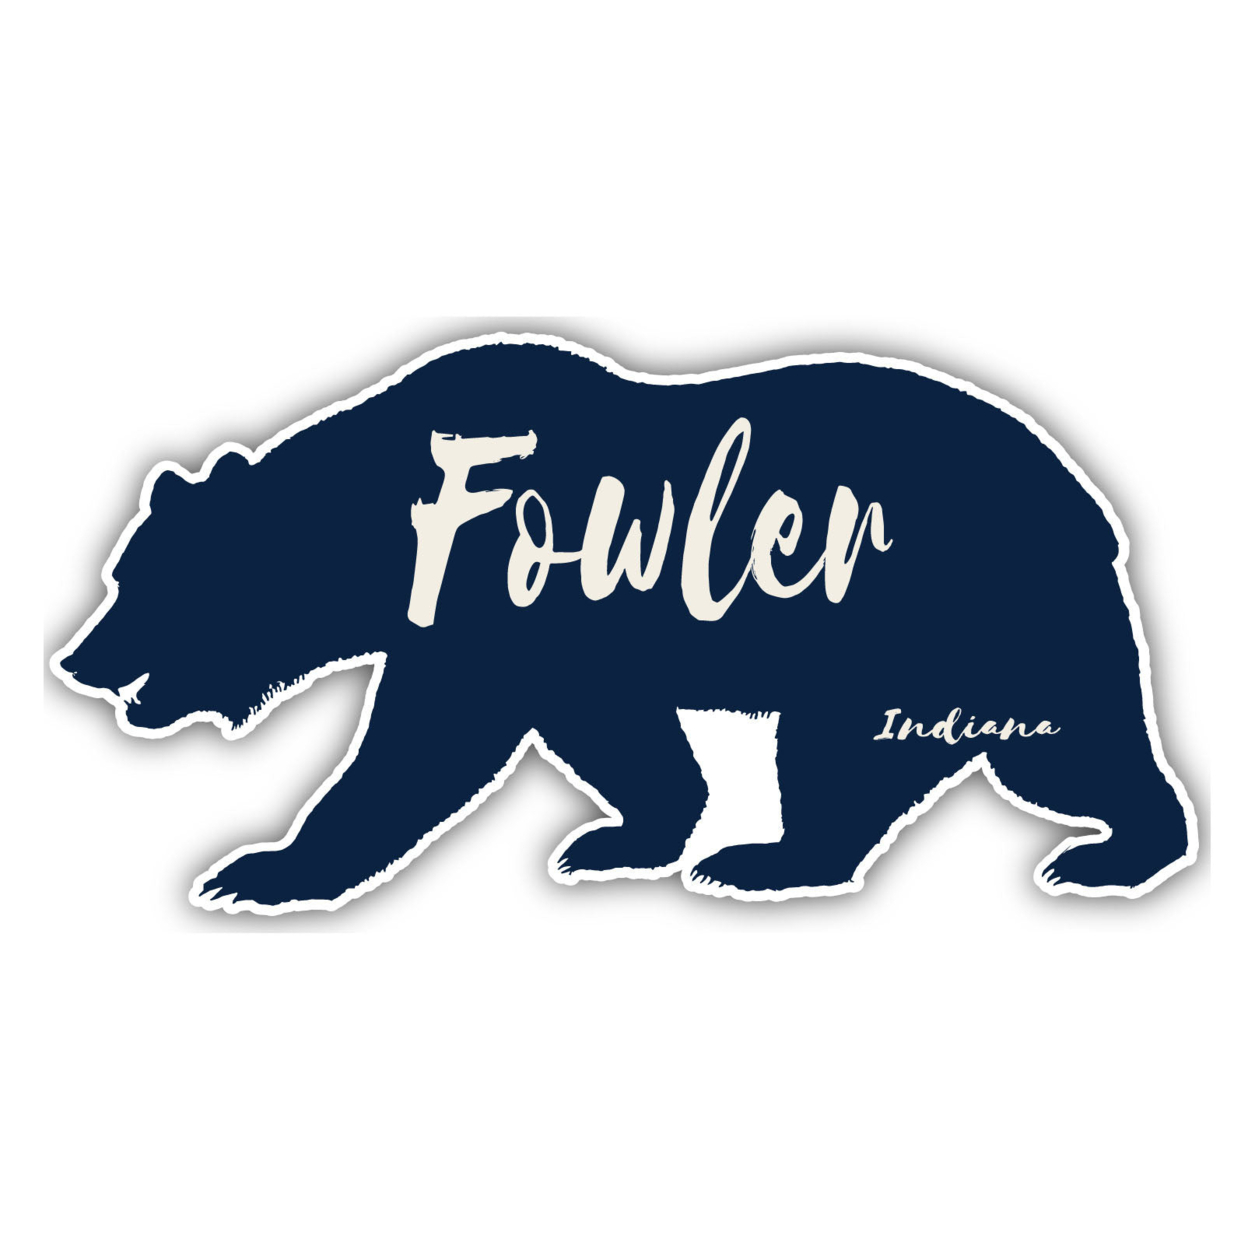 Fowler Indiana Souvenir Decorative Stickers (Choose Theme And Size) - 4-Pack, 10-Inch, Bear